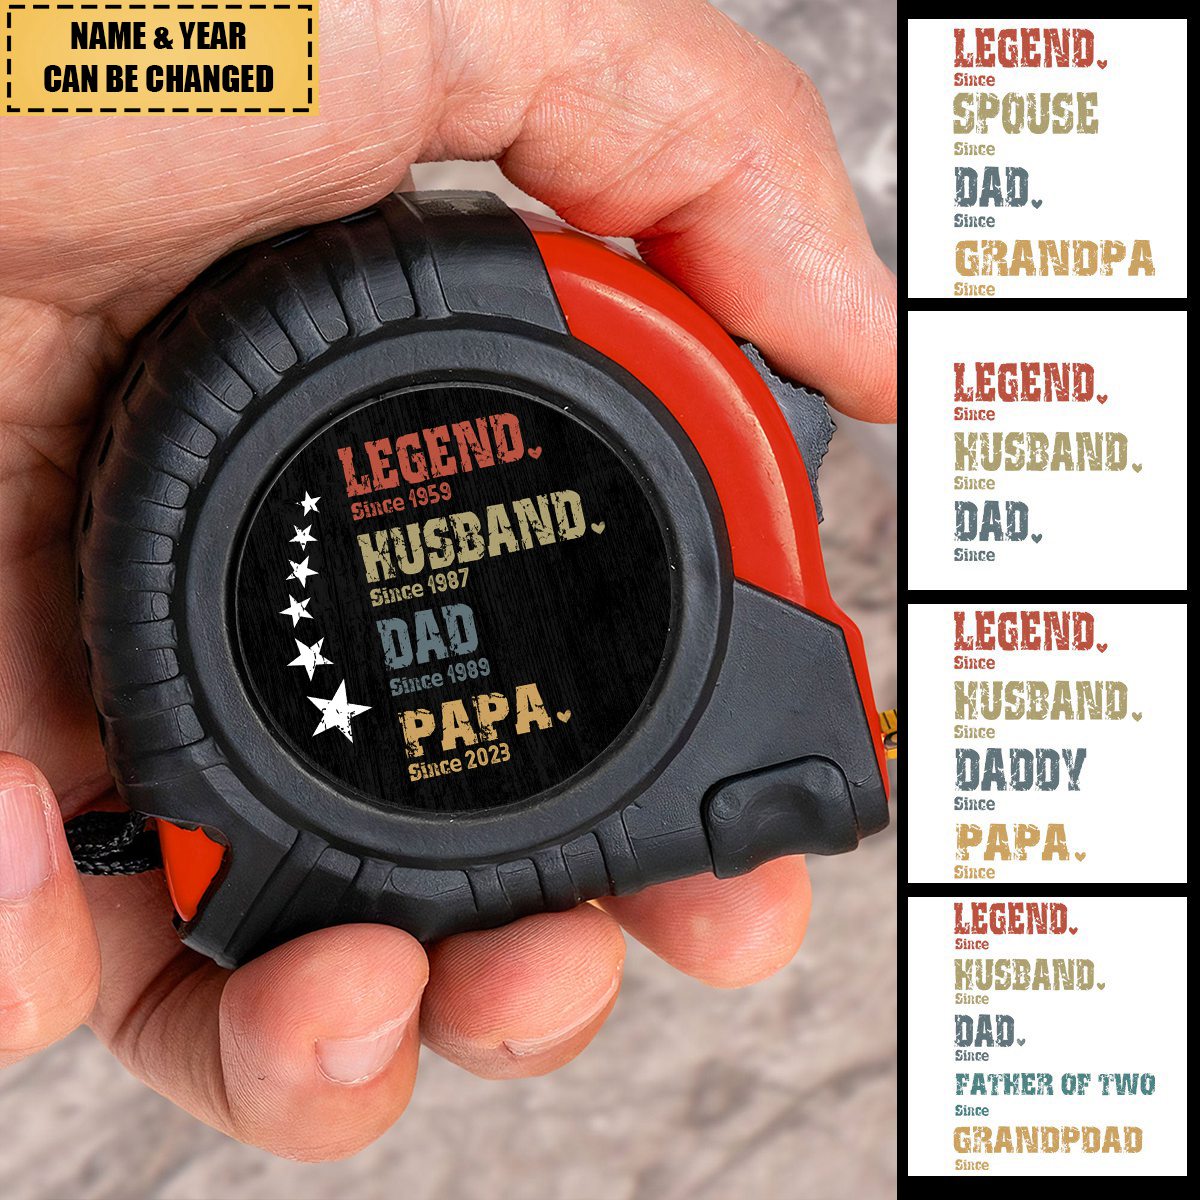 Legend Husband Daddy Grandpa - Birthday, Loving Gift For Dad, Father, Grandfather - Personalized Tape Measure